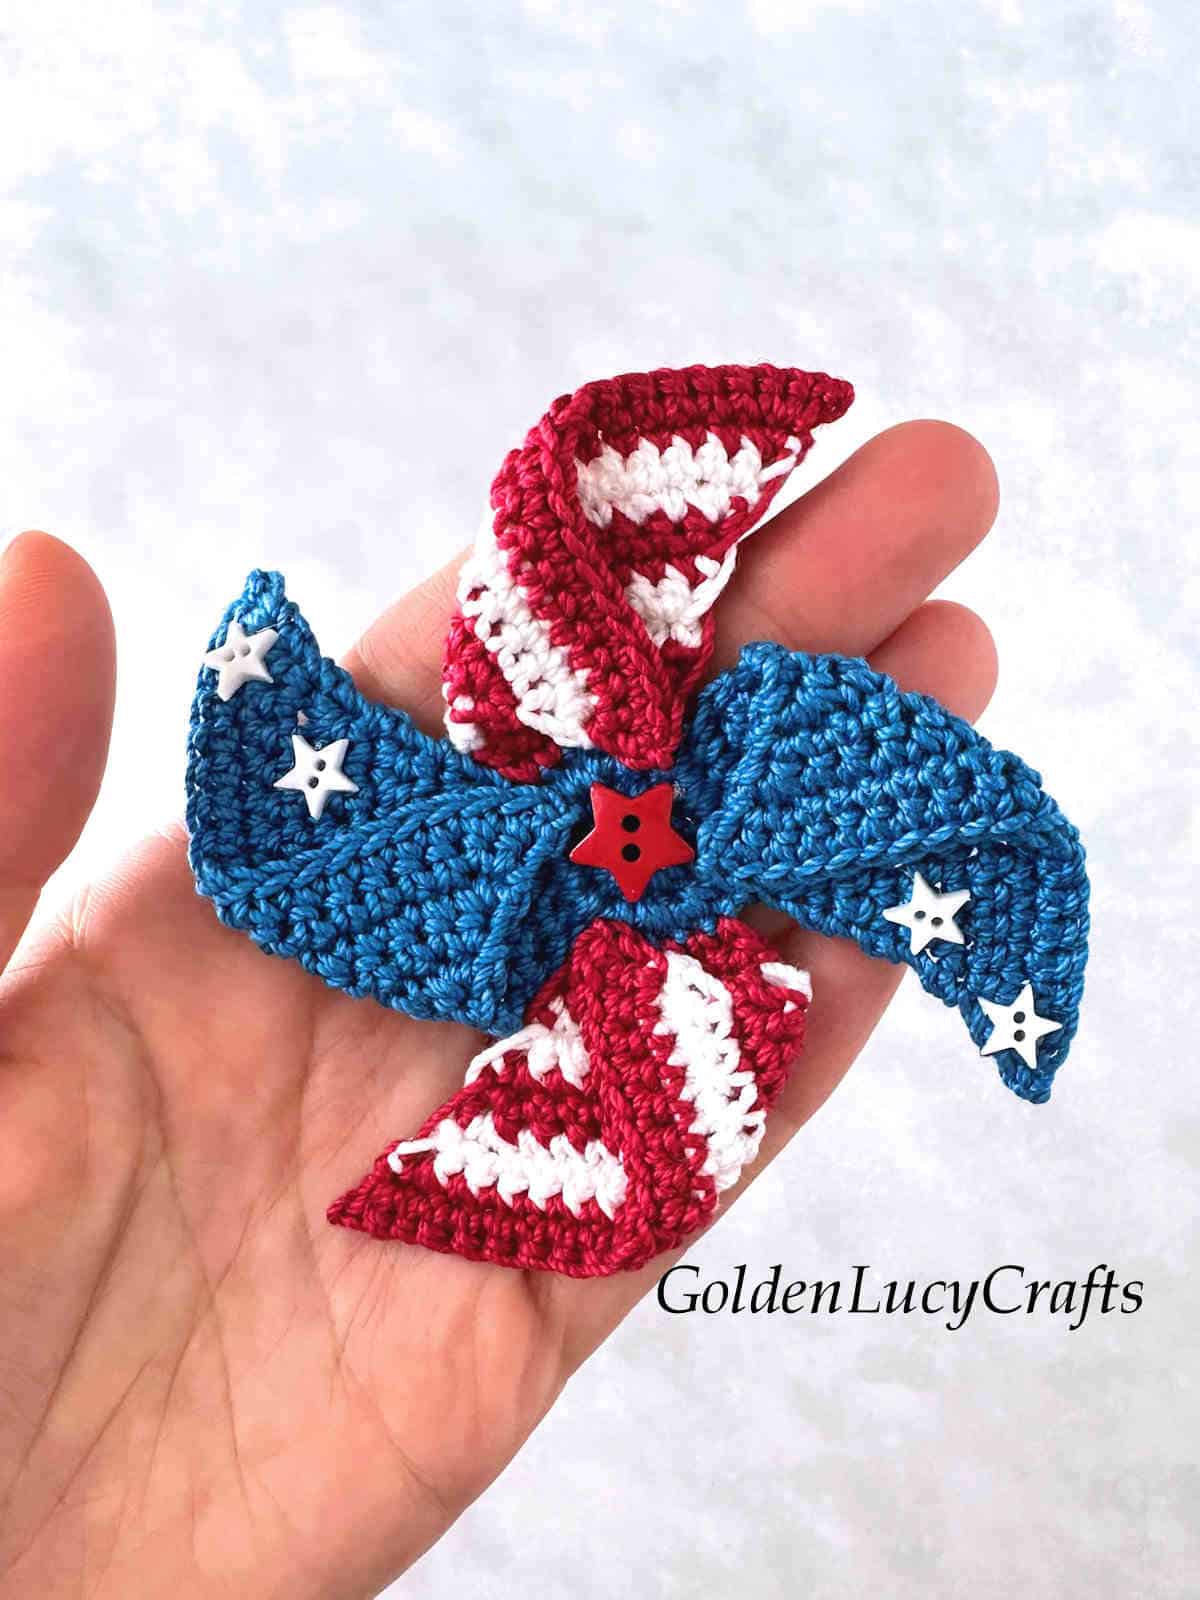 Crochet patriotic pinwheel in the palm of a hand.